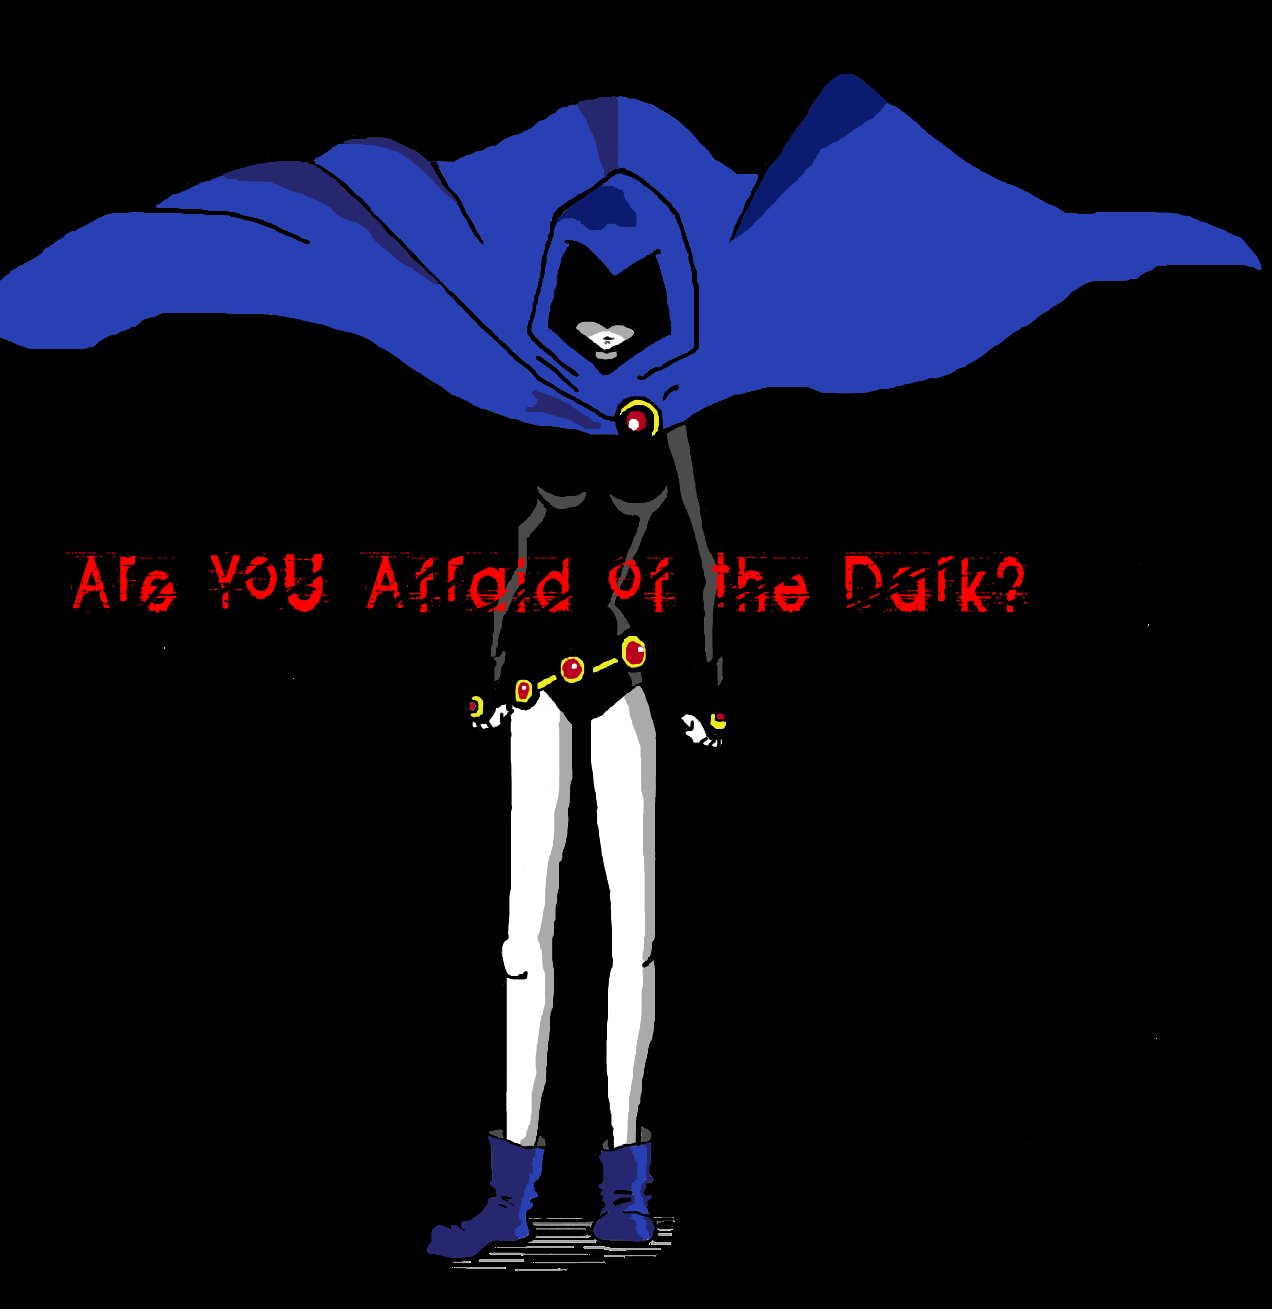 Are You Afraid of the Dark? by goth_revolution